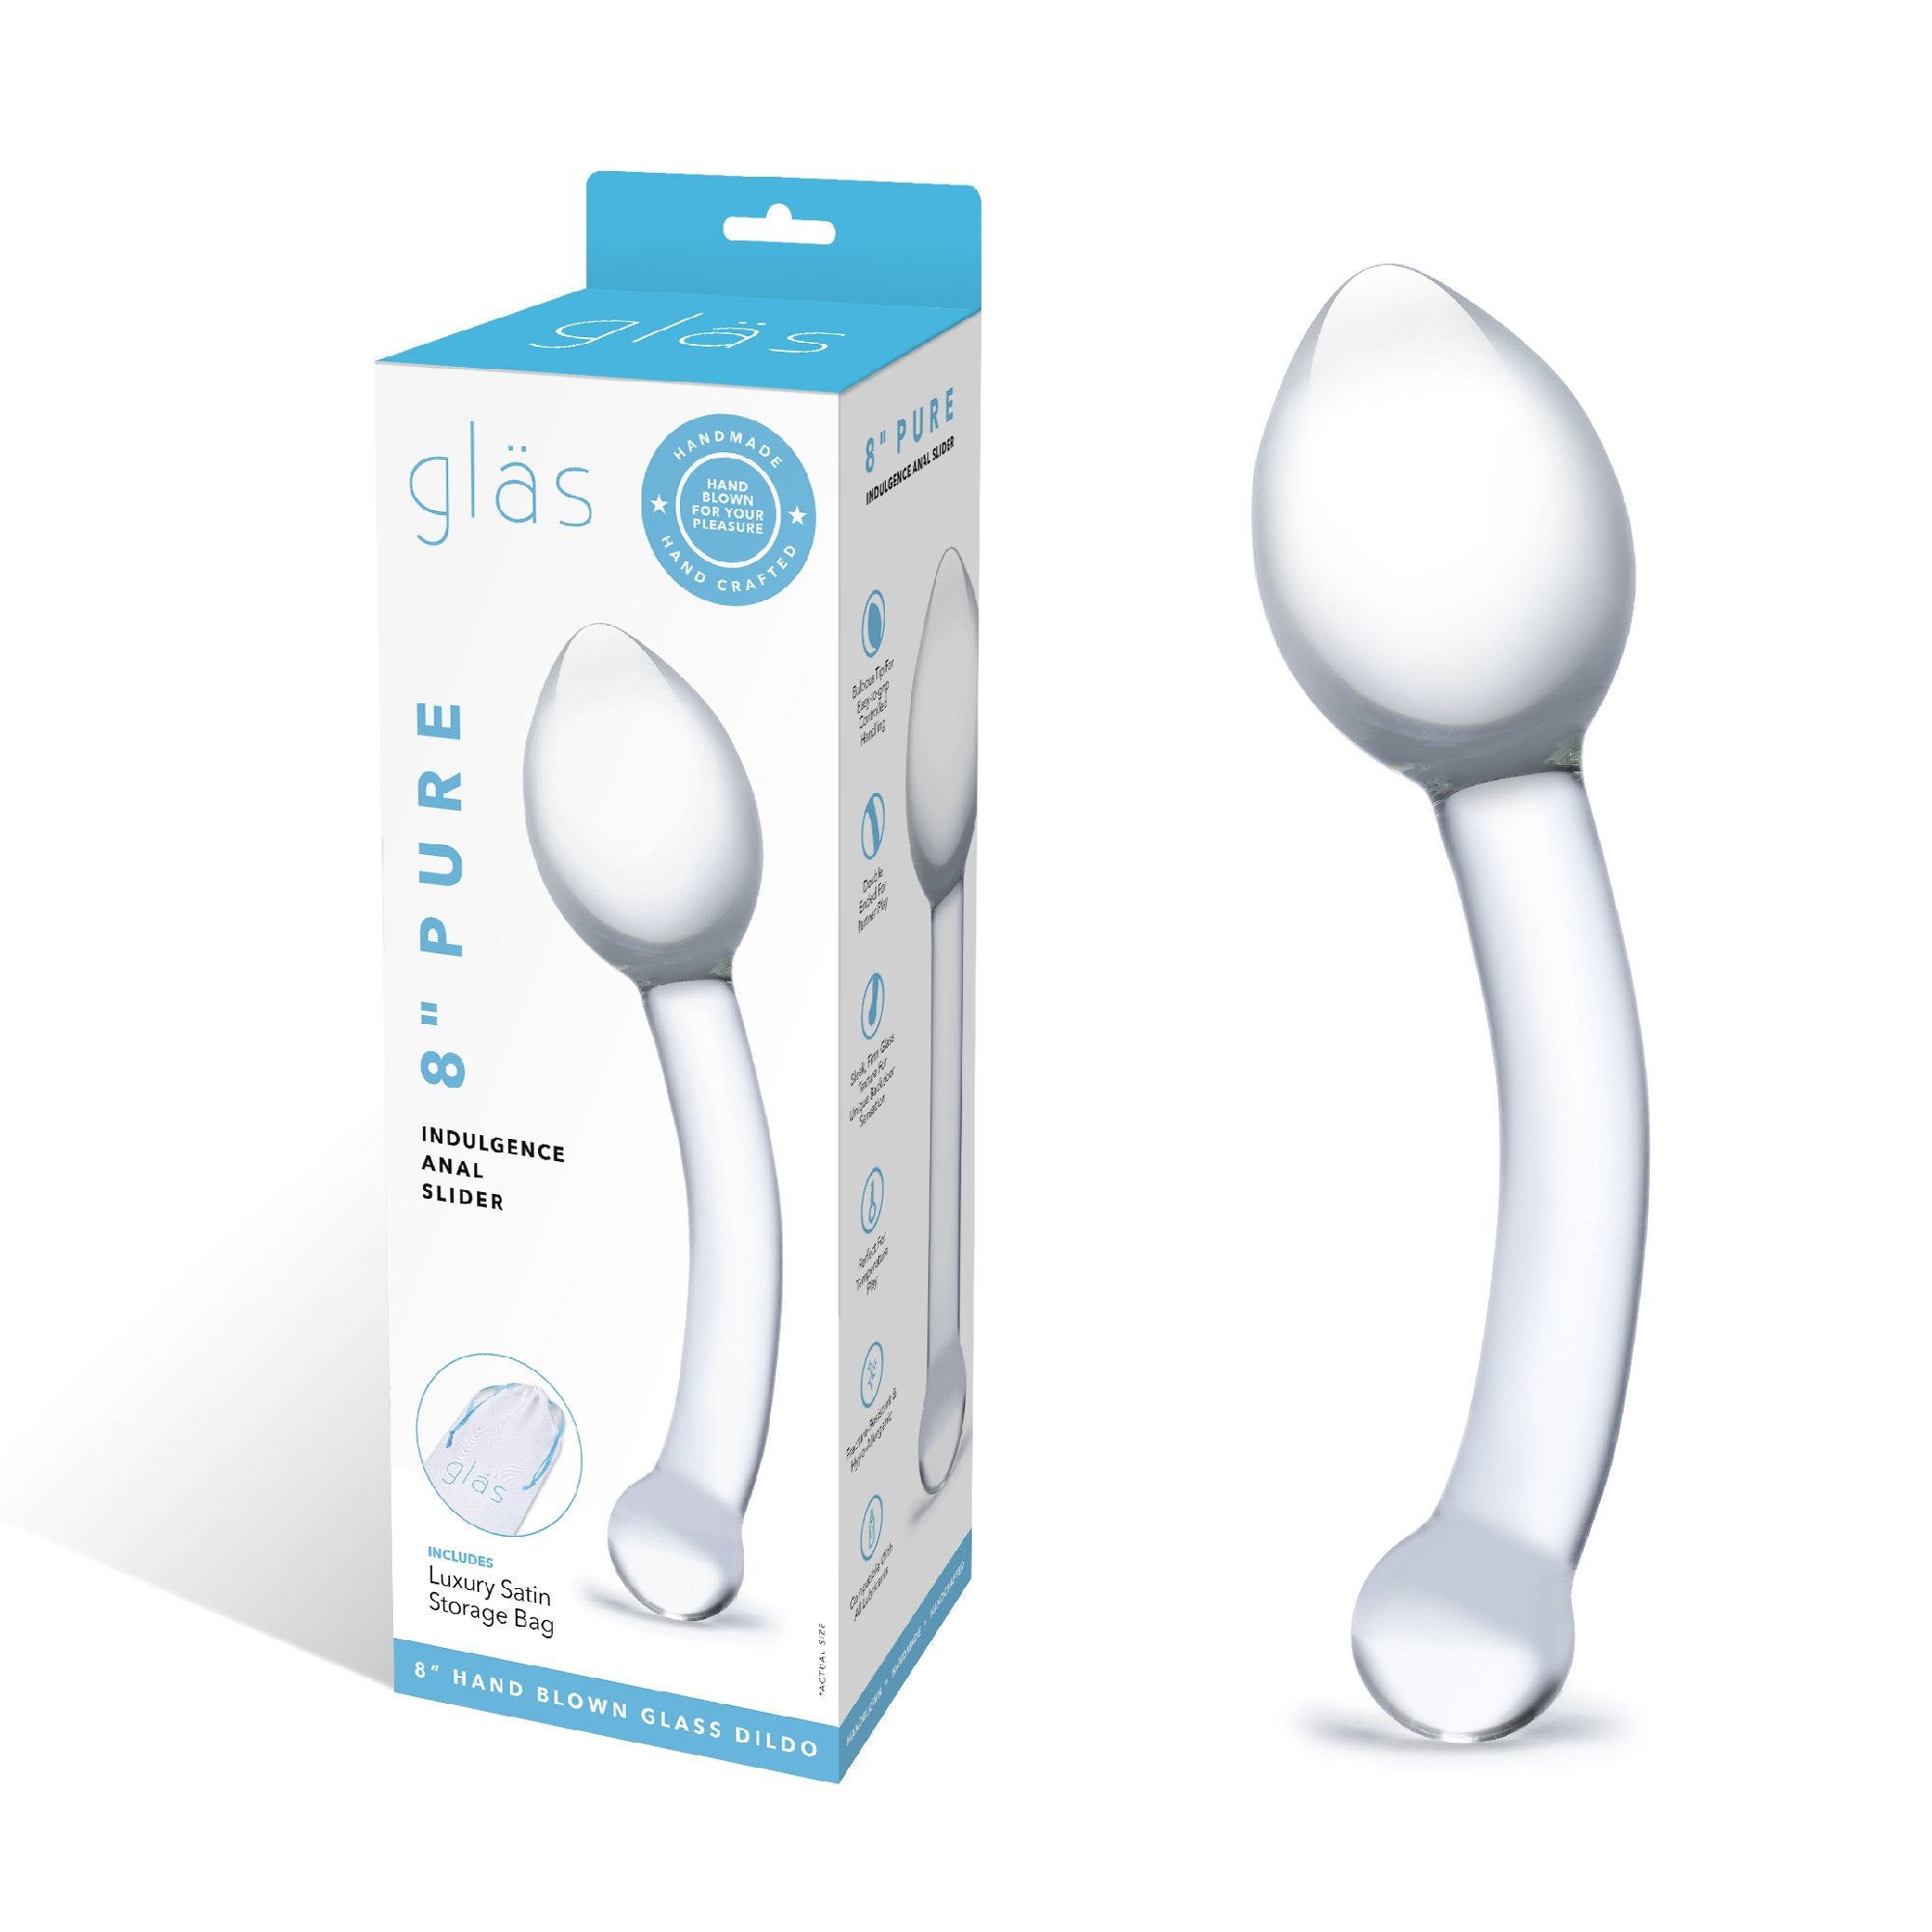 Packaging of the Gläs Pure Indulgence Anal Slider Glass Anal Toy